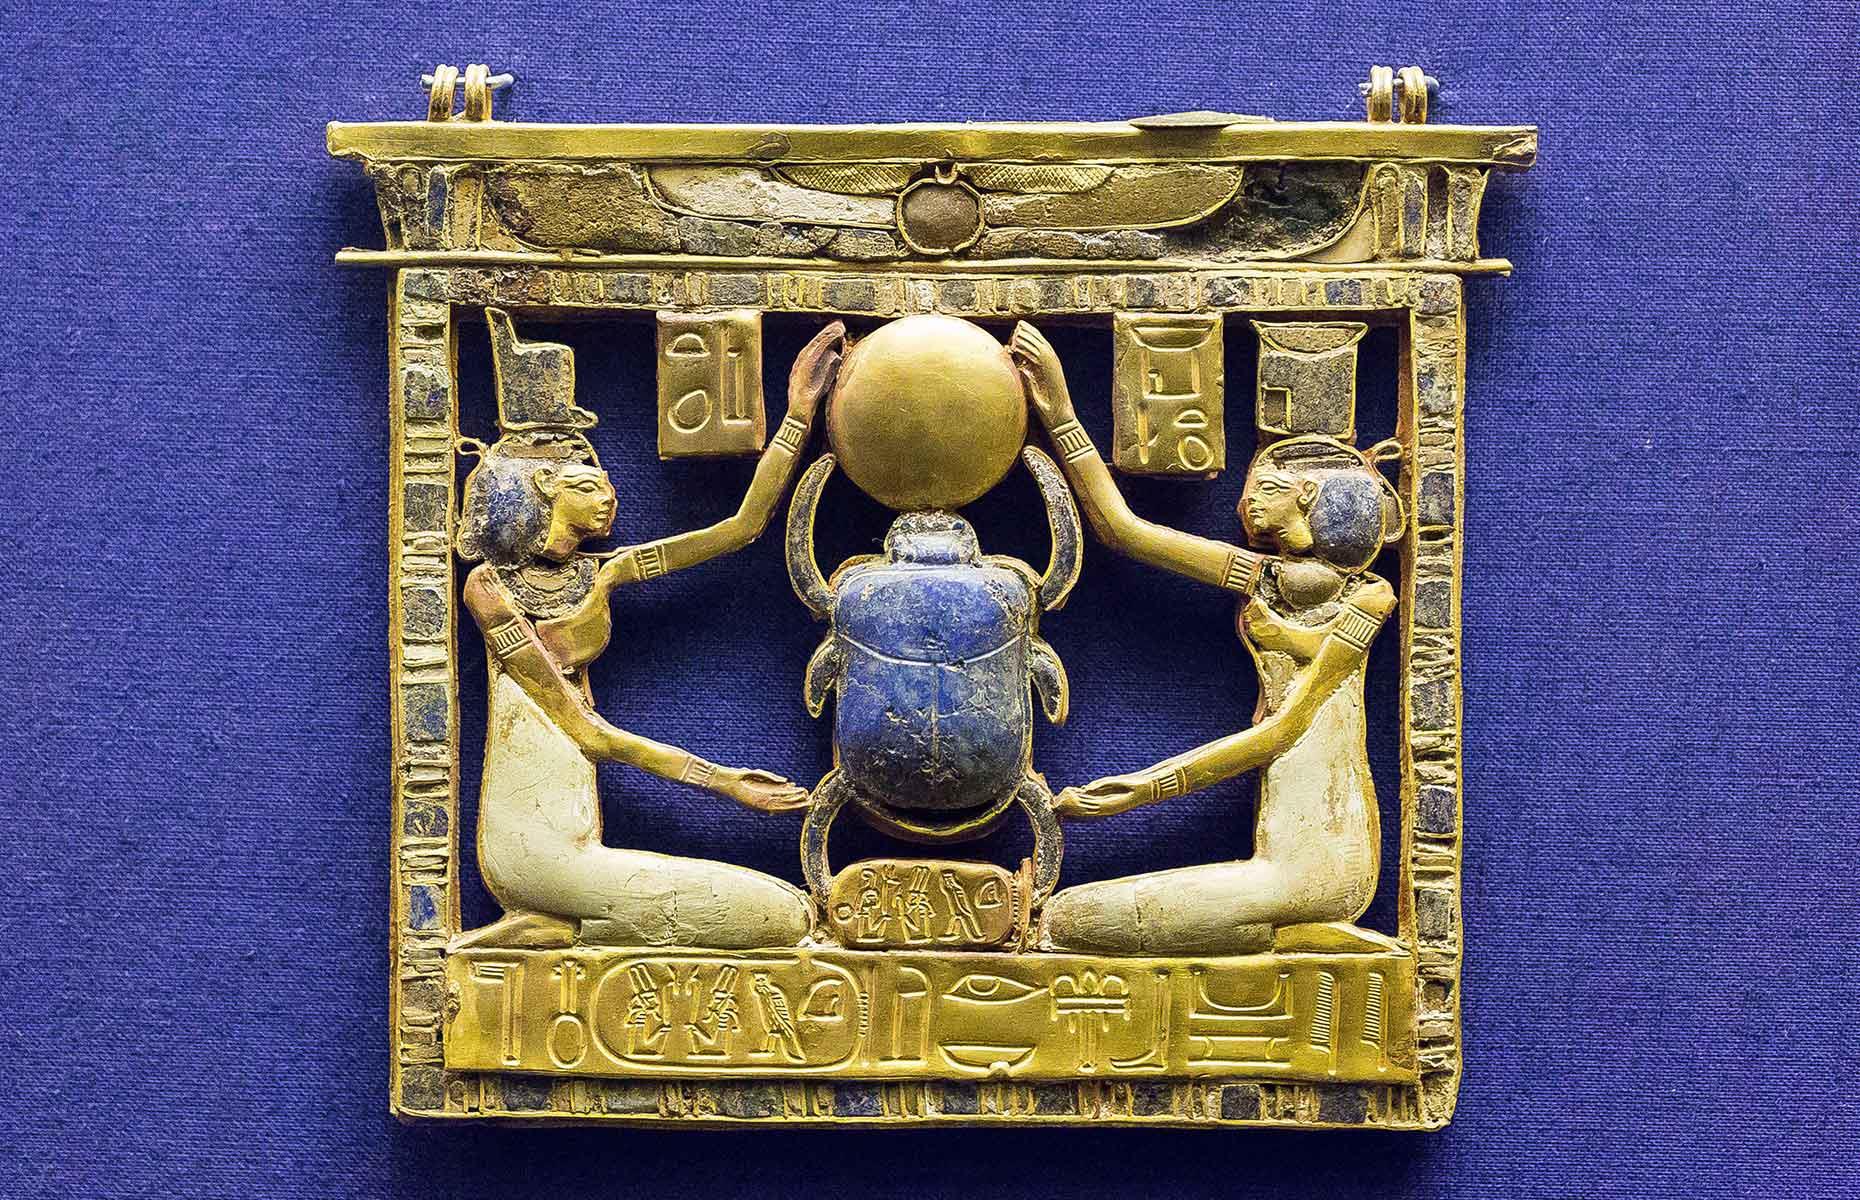 <p>Discovered inside the tomb of king Amenemope (a 21st-dynasty pharaoh) was this detailed pectoral brooch. At the centre is a lapis lazuli scarab touching the golden sun disc, representing rebirth. The scarab is flanked by the goddesses Isis and Nephthys, who protected the wearer, while along the bottom runs a cartouche, an inscription of the king's name. </p>  <p><a href="https://www.loveexploring.com/gallerylist/70876/littleknown-incredible-roman-ruins-around-the-world"><strong>Discover these little-known Roman ruins from around the world</strong></a></p>